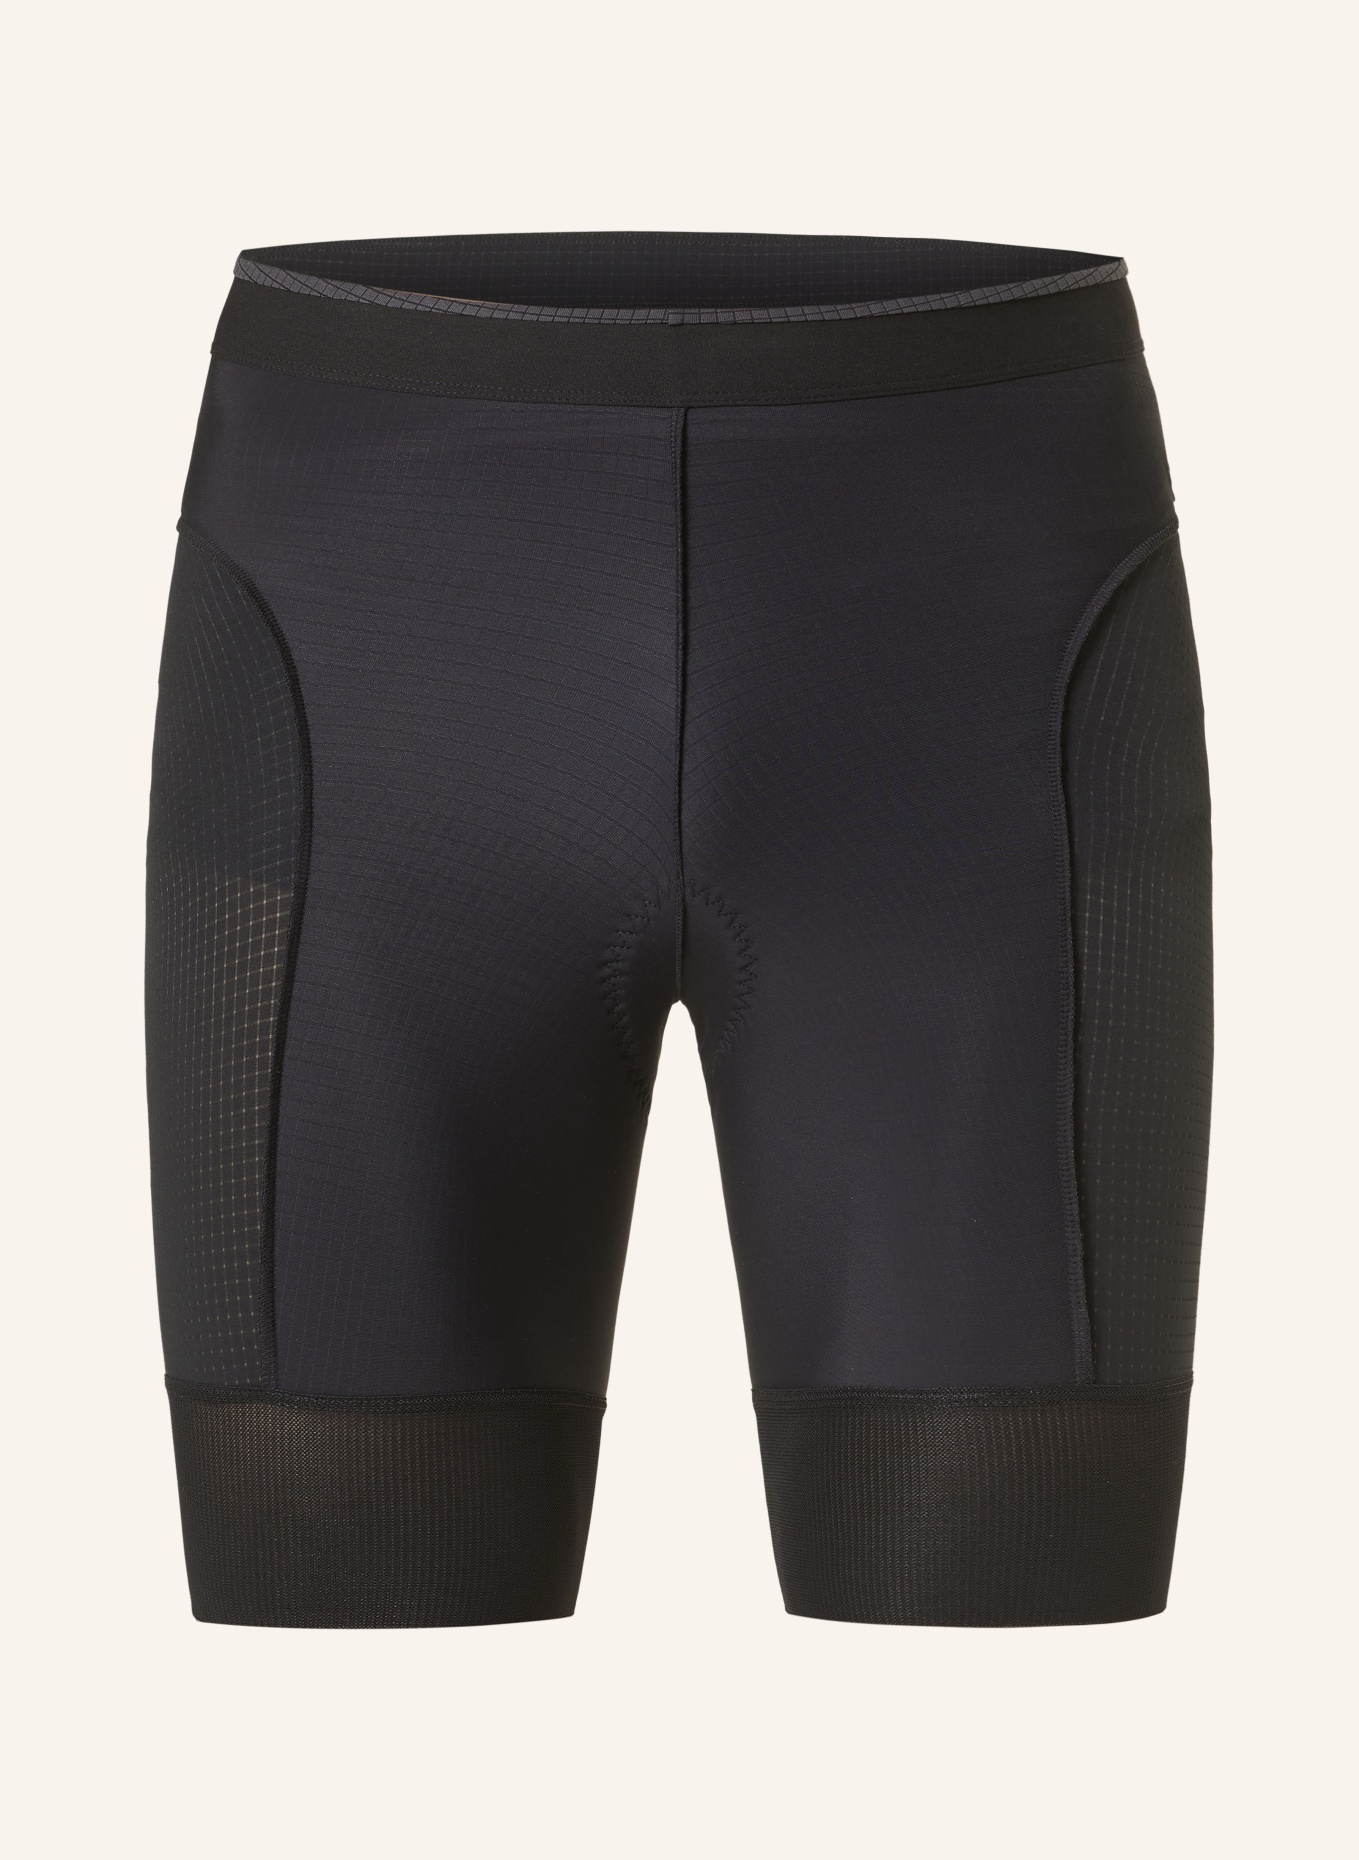 SPECIALIZED Cycling undershorts PRIME SWAT LINER with padded insert, Color: BLACK (Image 1)